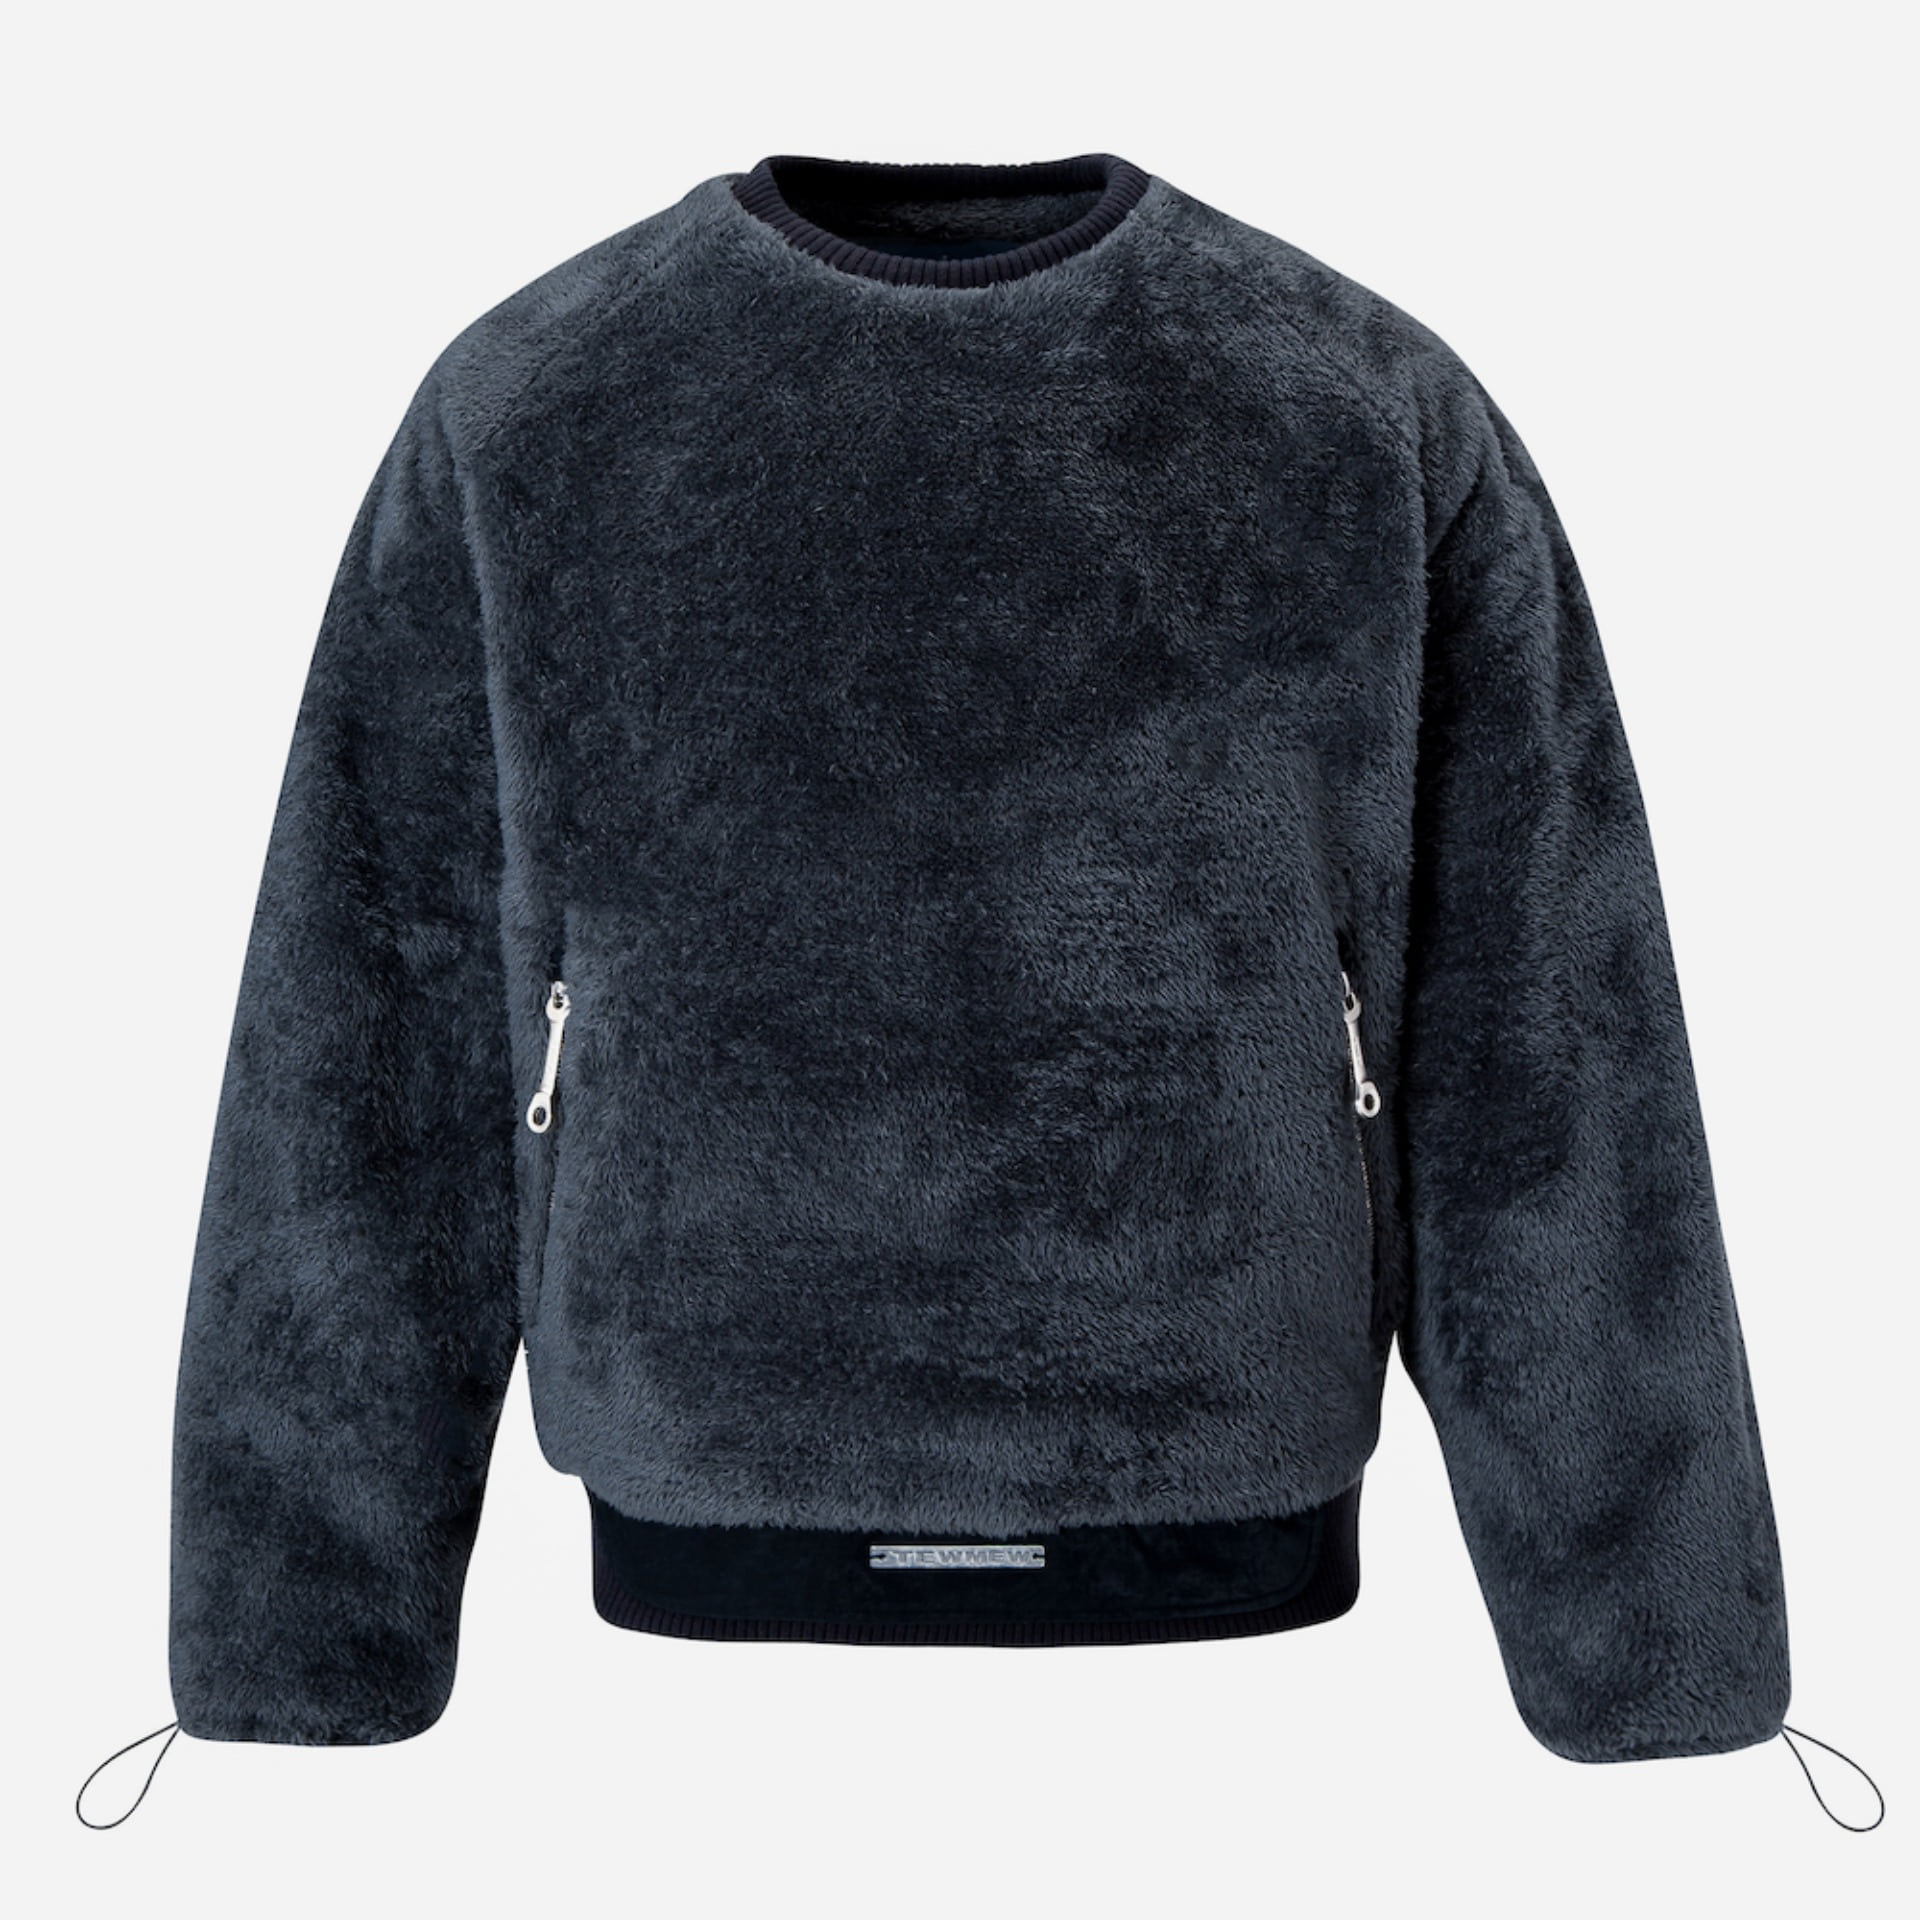 GRIZZLY PULLOVER Ver 2.0 (Navy)